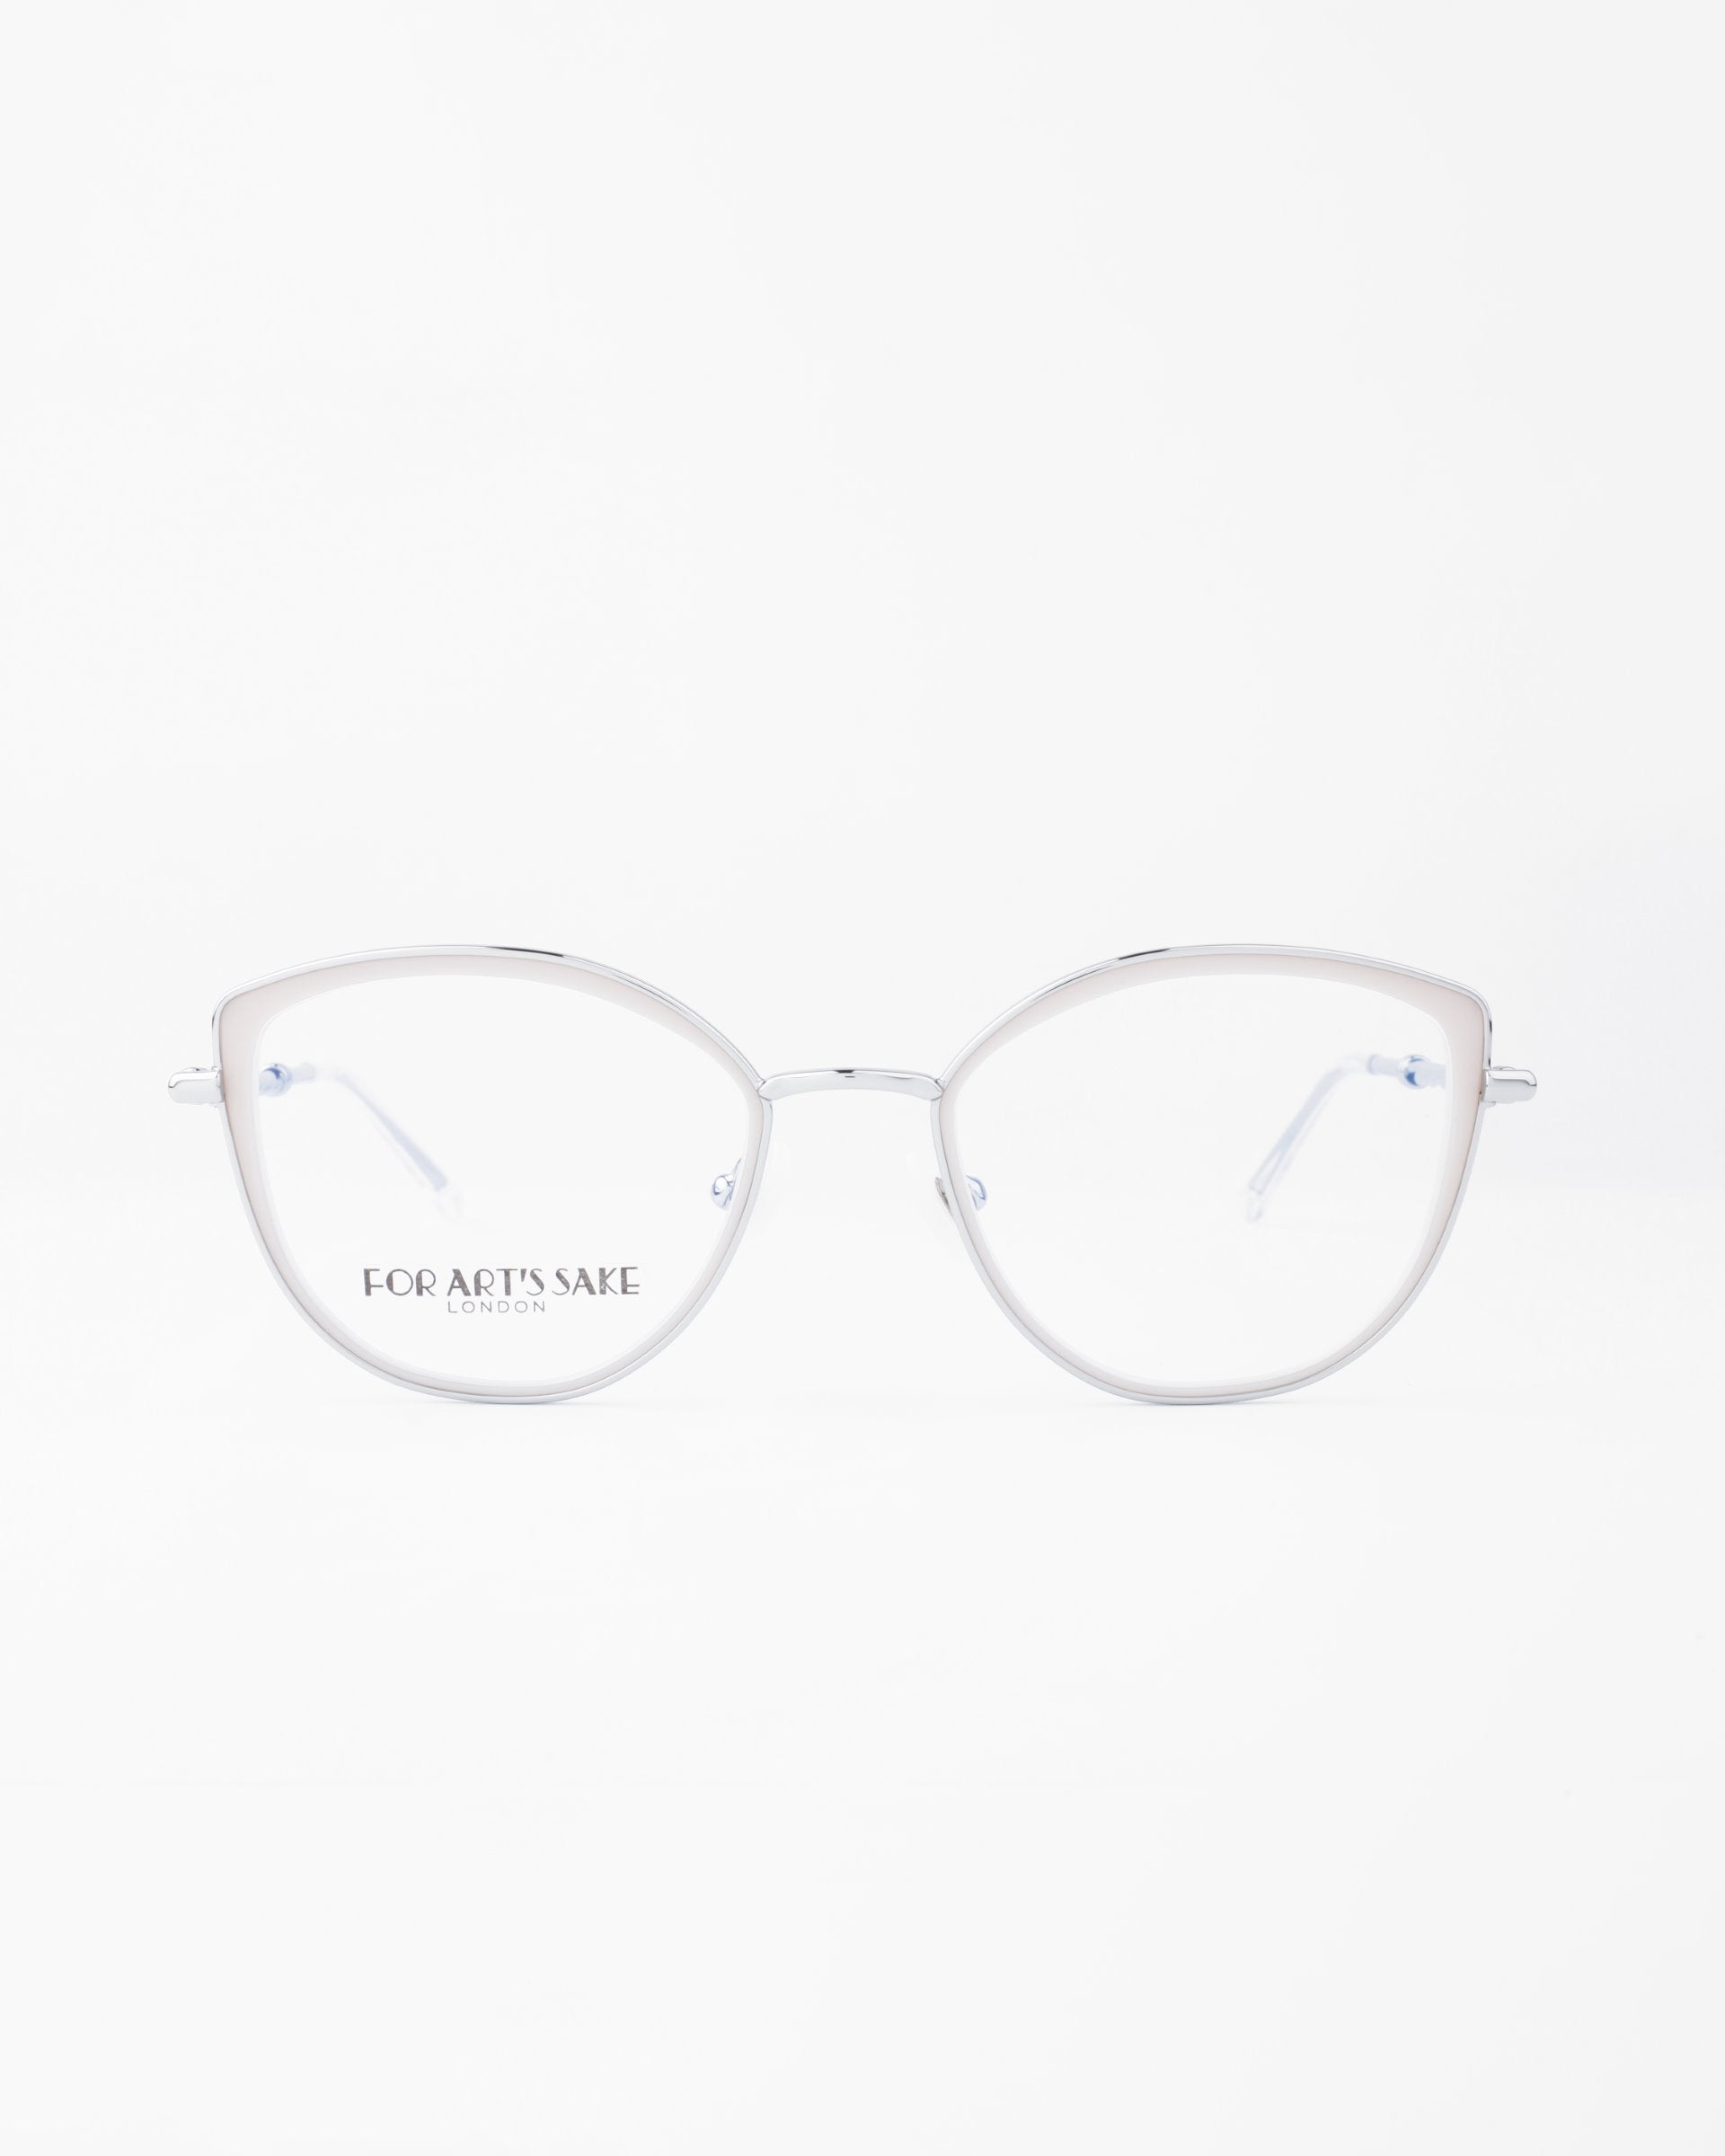 A pair of metallic cat-eye glasses with clear lenses and thin frames on a white background. The left lens has &quot;For Art&#39;s Sake®&quot; printed in small text. These elegant Julie spectacles also feature an 18-karat gold-plated finish.